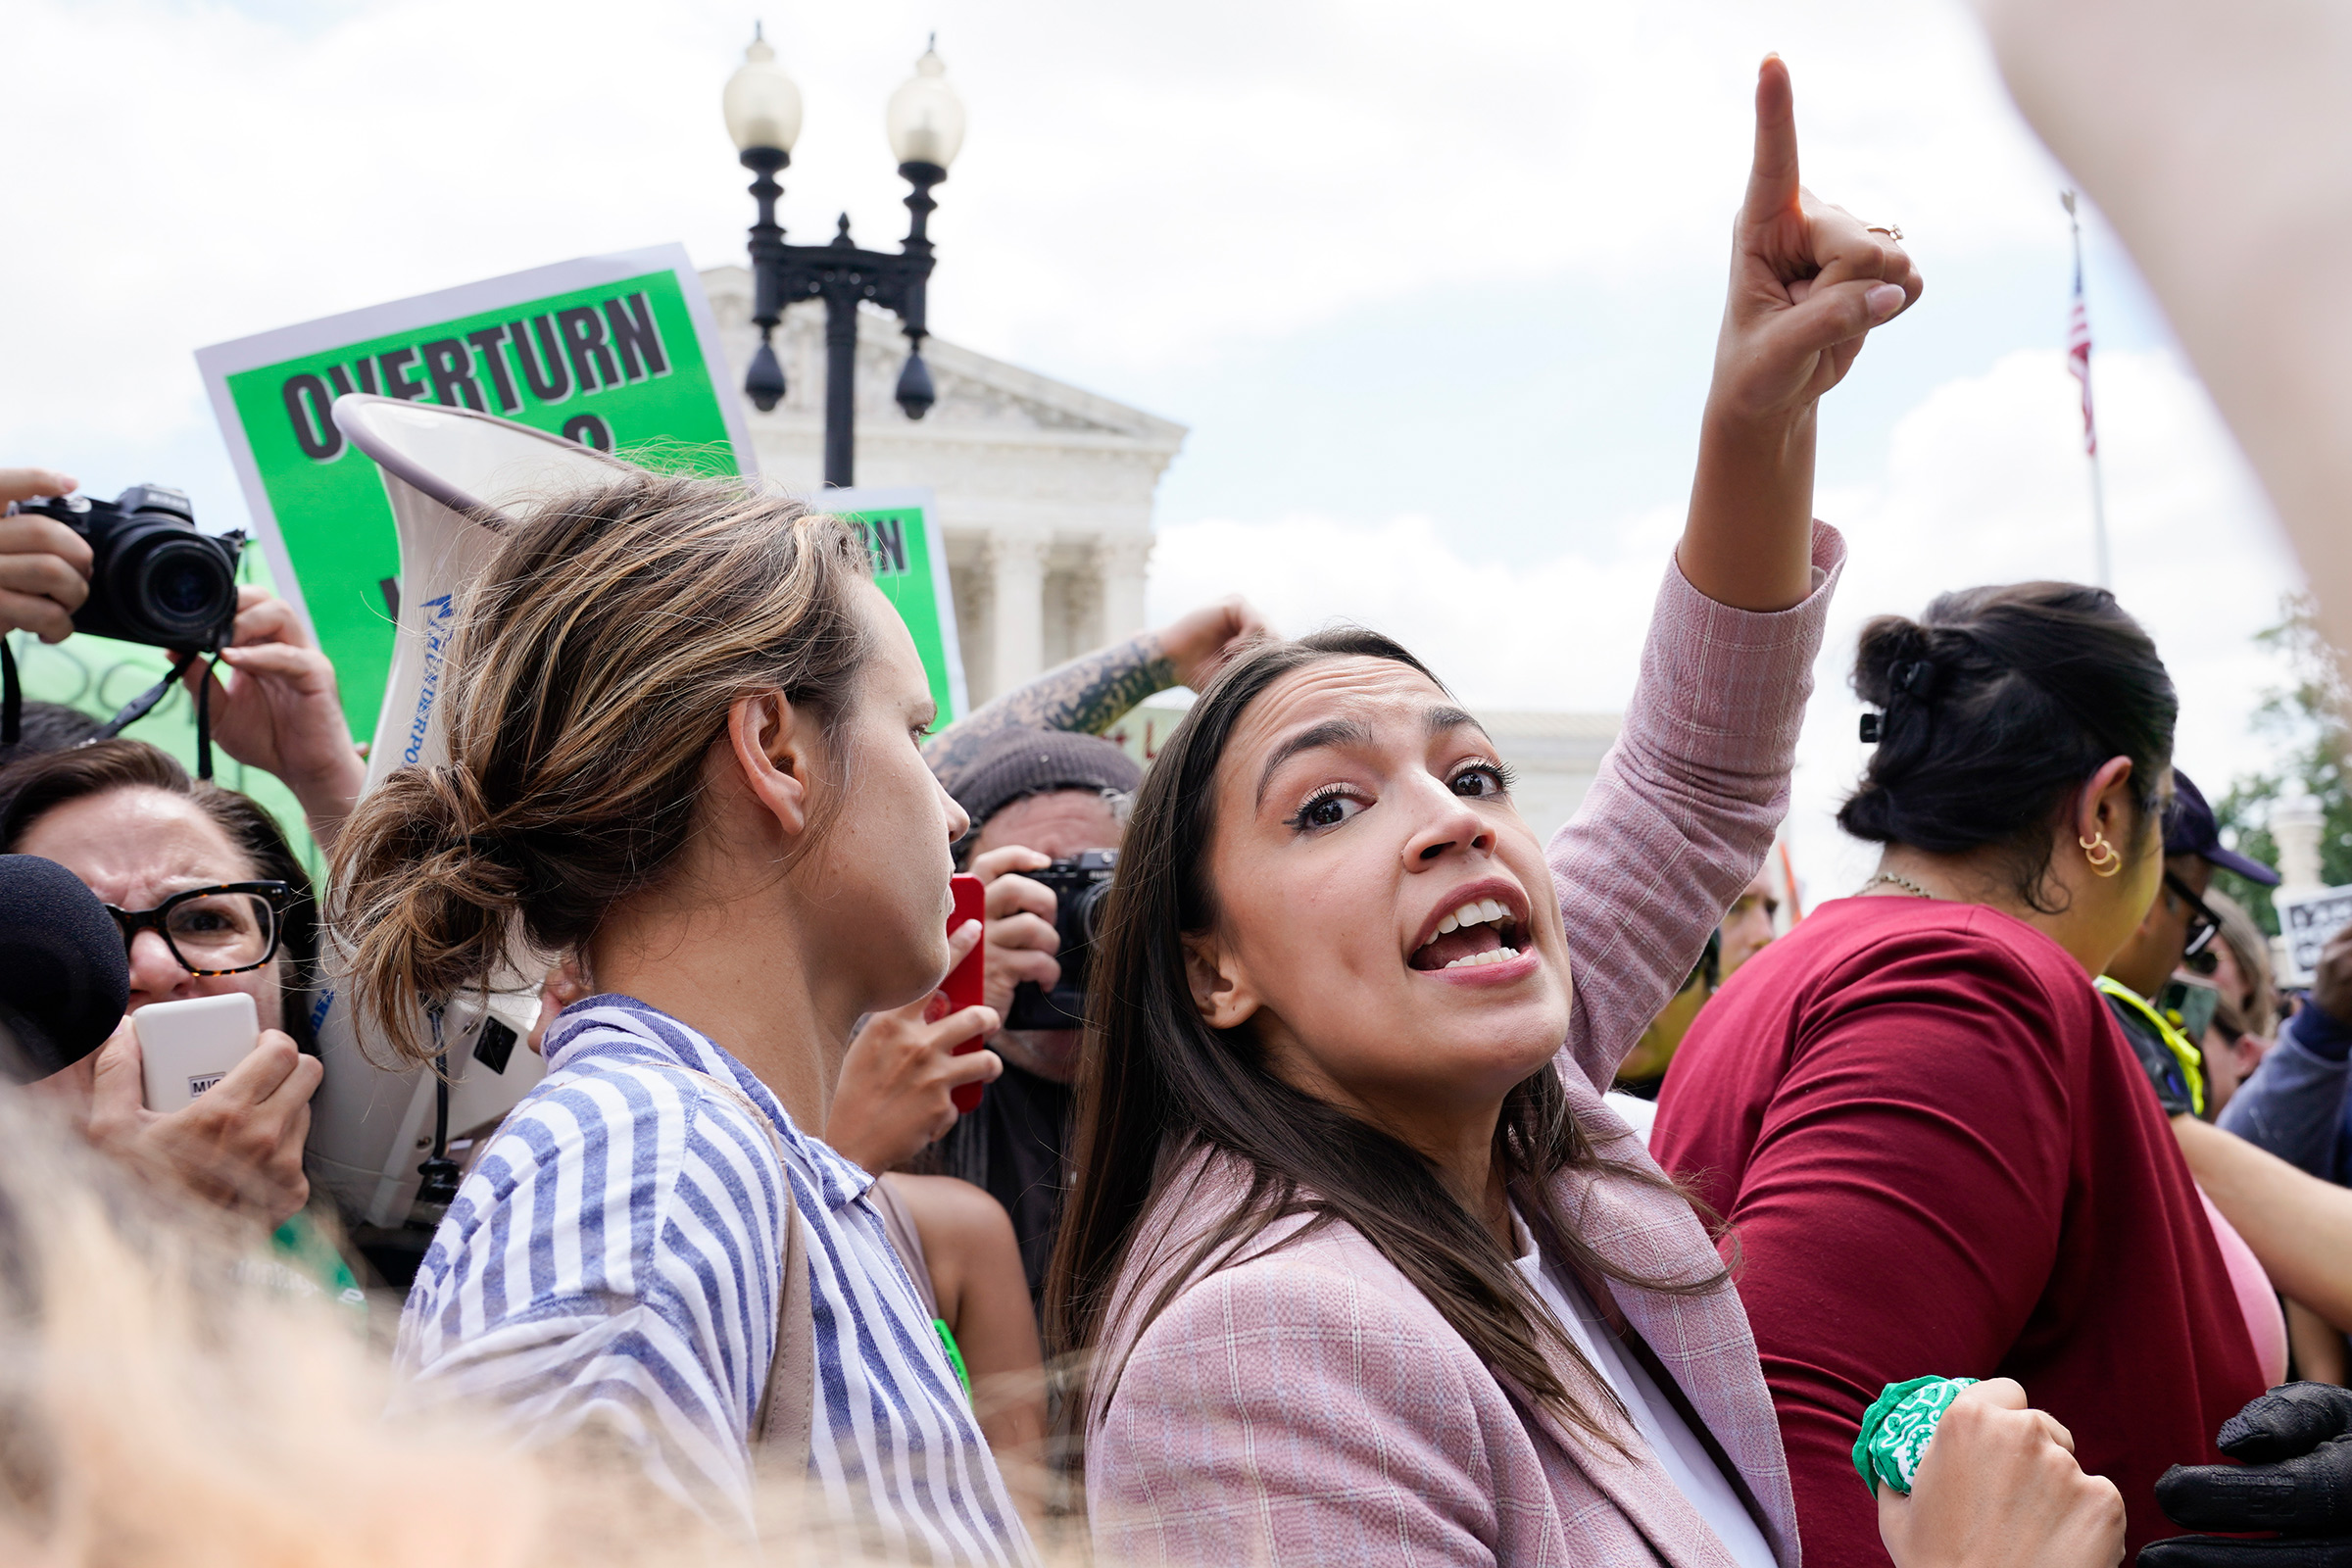 Rep. Alexandria Ocasio-Cortez, D-N.Y., joins abortion-rights activists as they demonstrate following the Supreme Court's decision to overturn Roe v. Wade in Washington, D.C., June 24, 2022. (Jacquelyn Martin—AP)